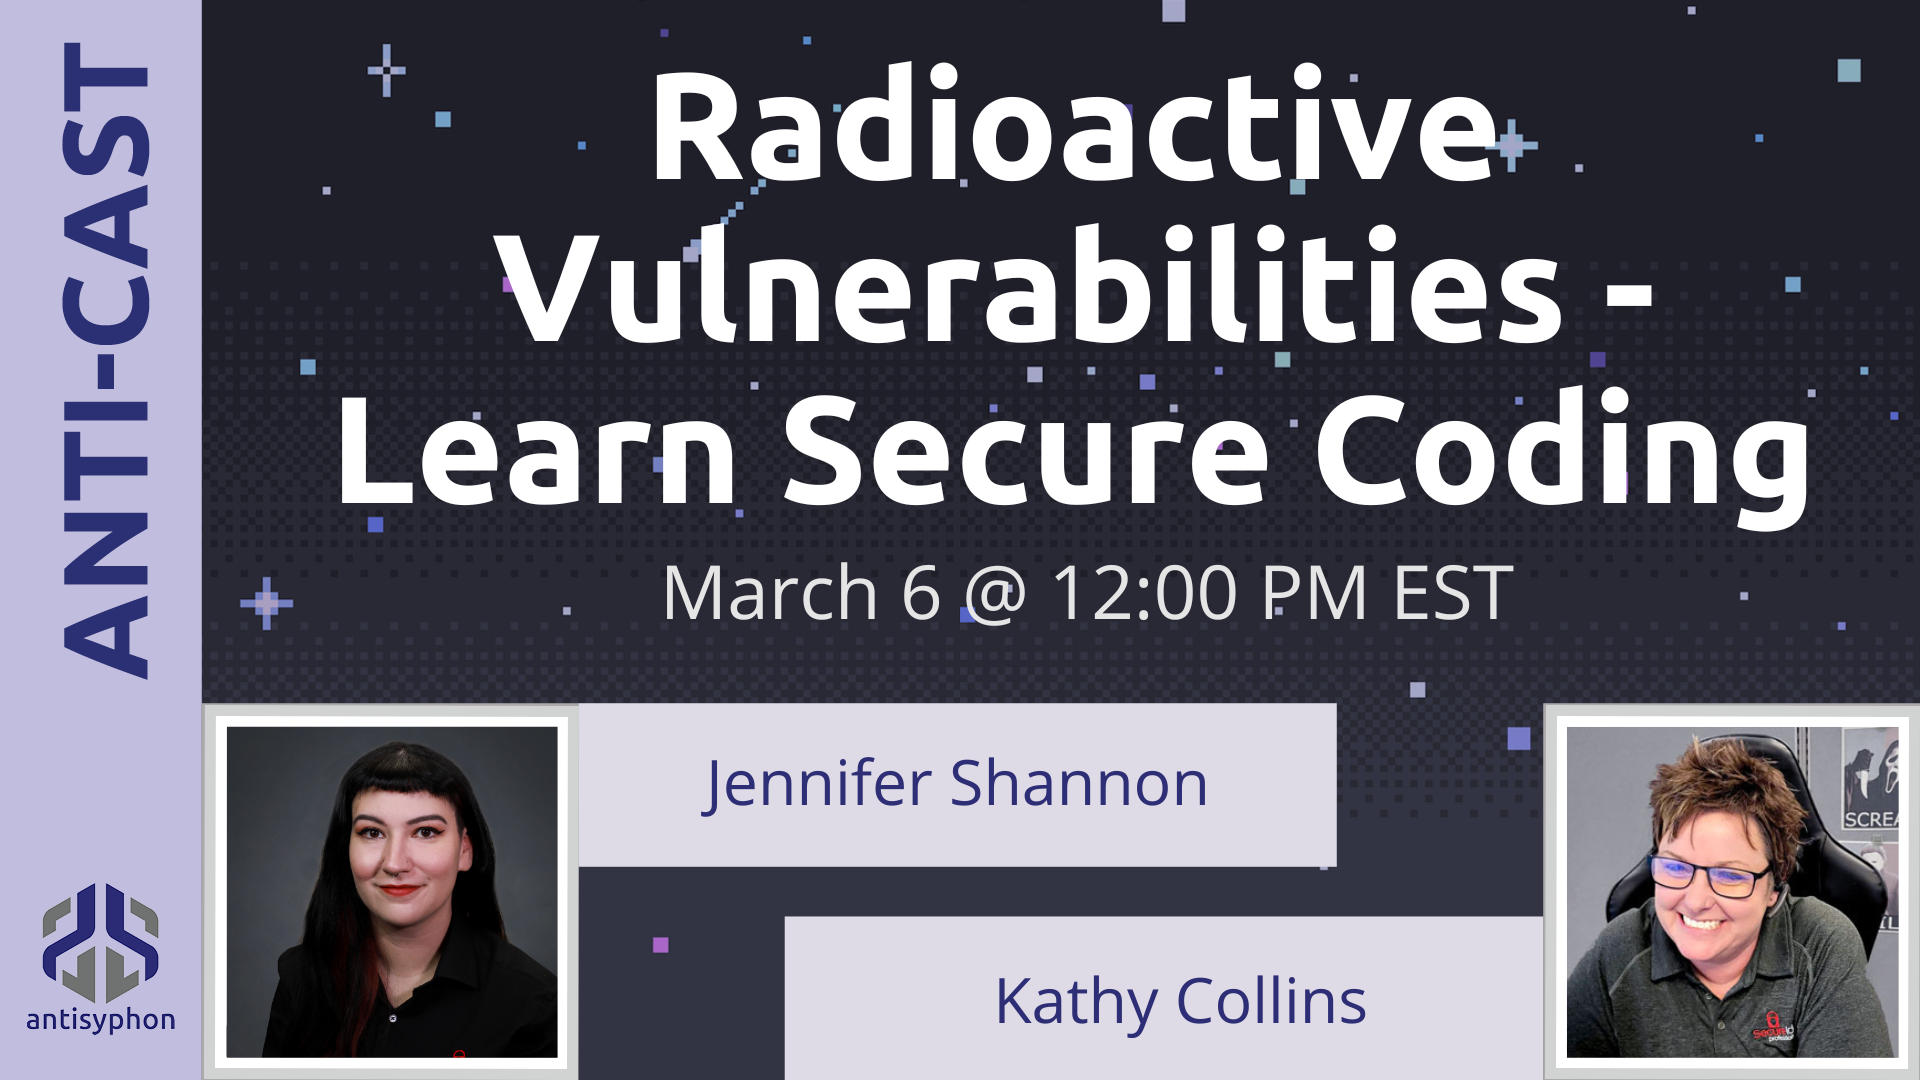 Radioactive Vulnerabilities Learn Secure Coding with Jennifer Shannon and Kathy Collins